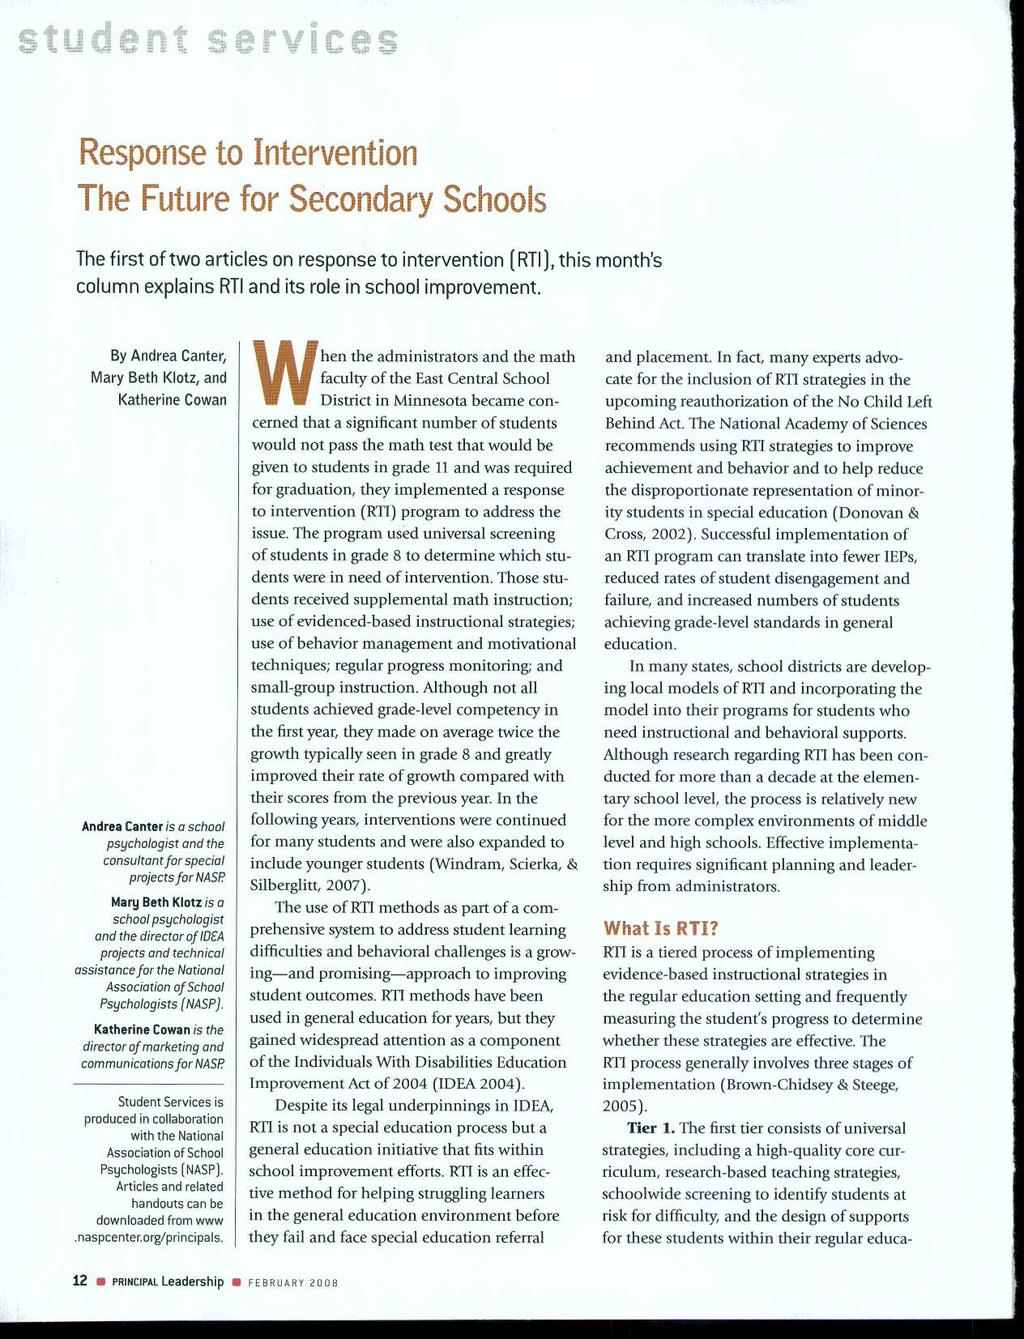 Response to Intervention The Future for Secondary Schools The first of two articles on response to intervention (RTI), this month's column explains RTI and its role in school improvement.